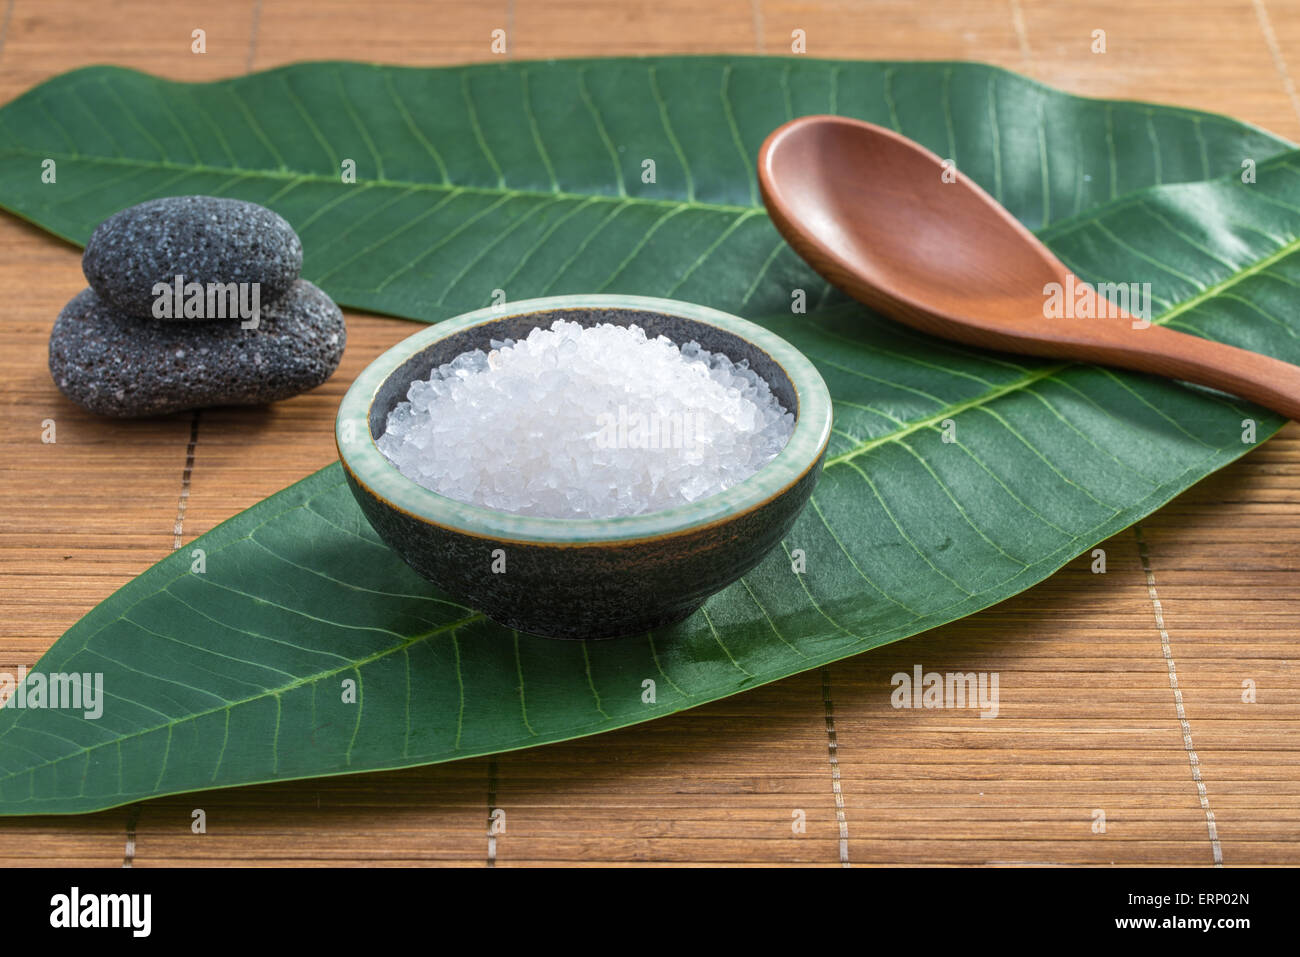 salt, spoon, stone, on green leaf for health spa material Stock Photo